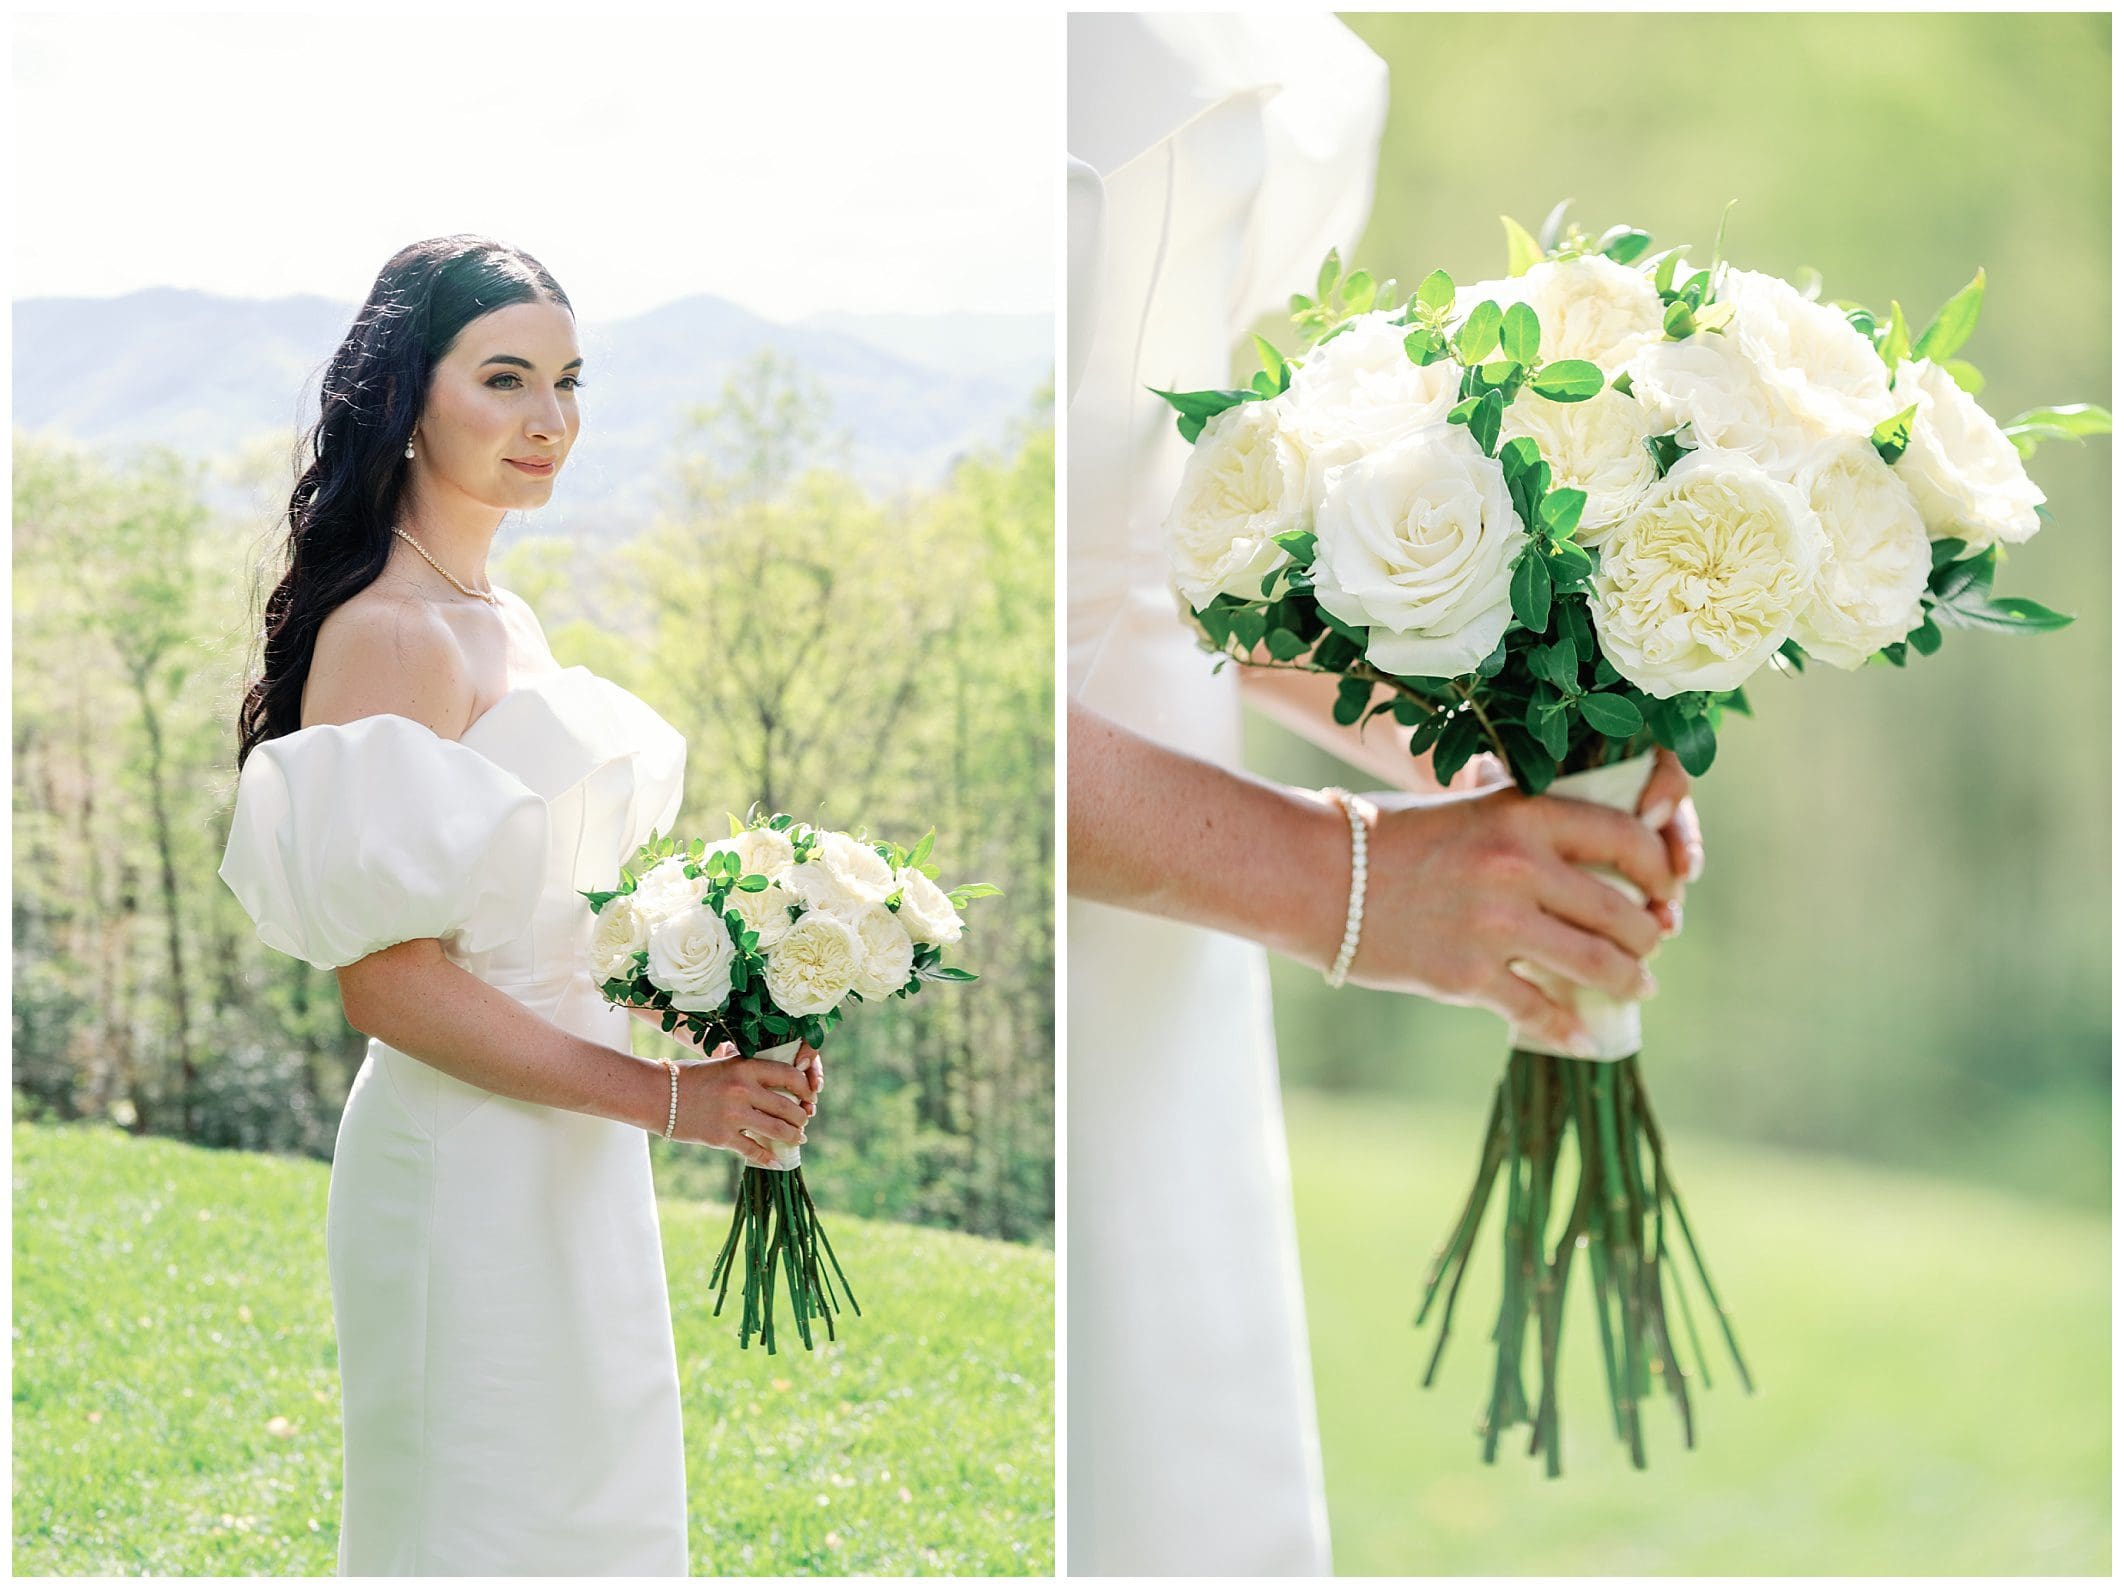 Bride in a white dress holding a bouquet of white roses, with a scenic mountain backdrop in one image, and a close-up of the bouquet in the other.